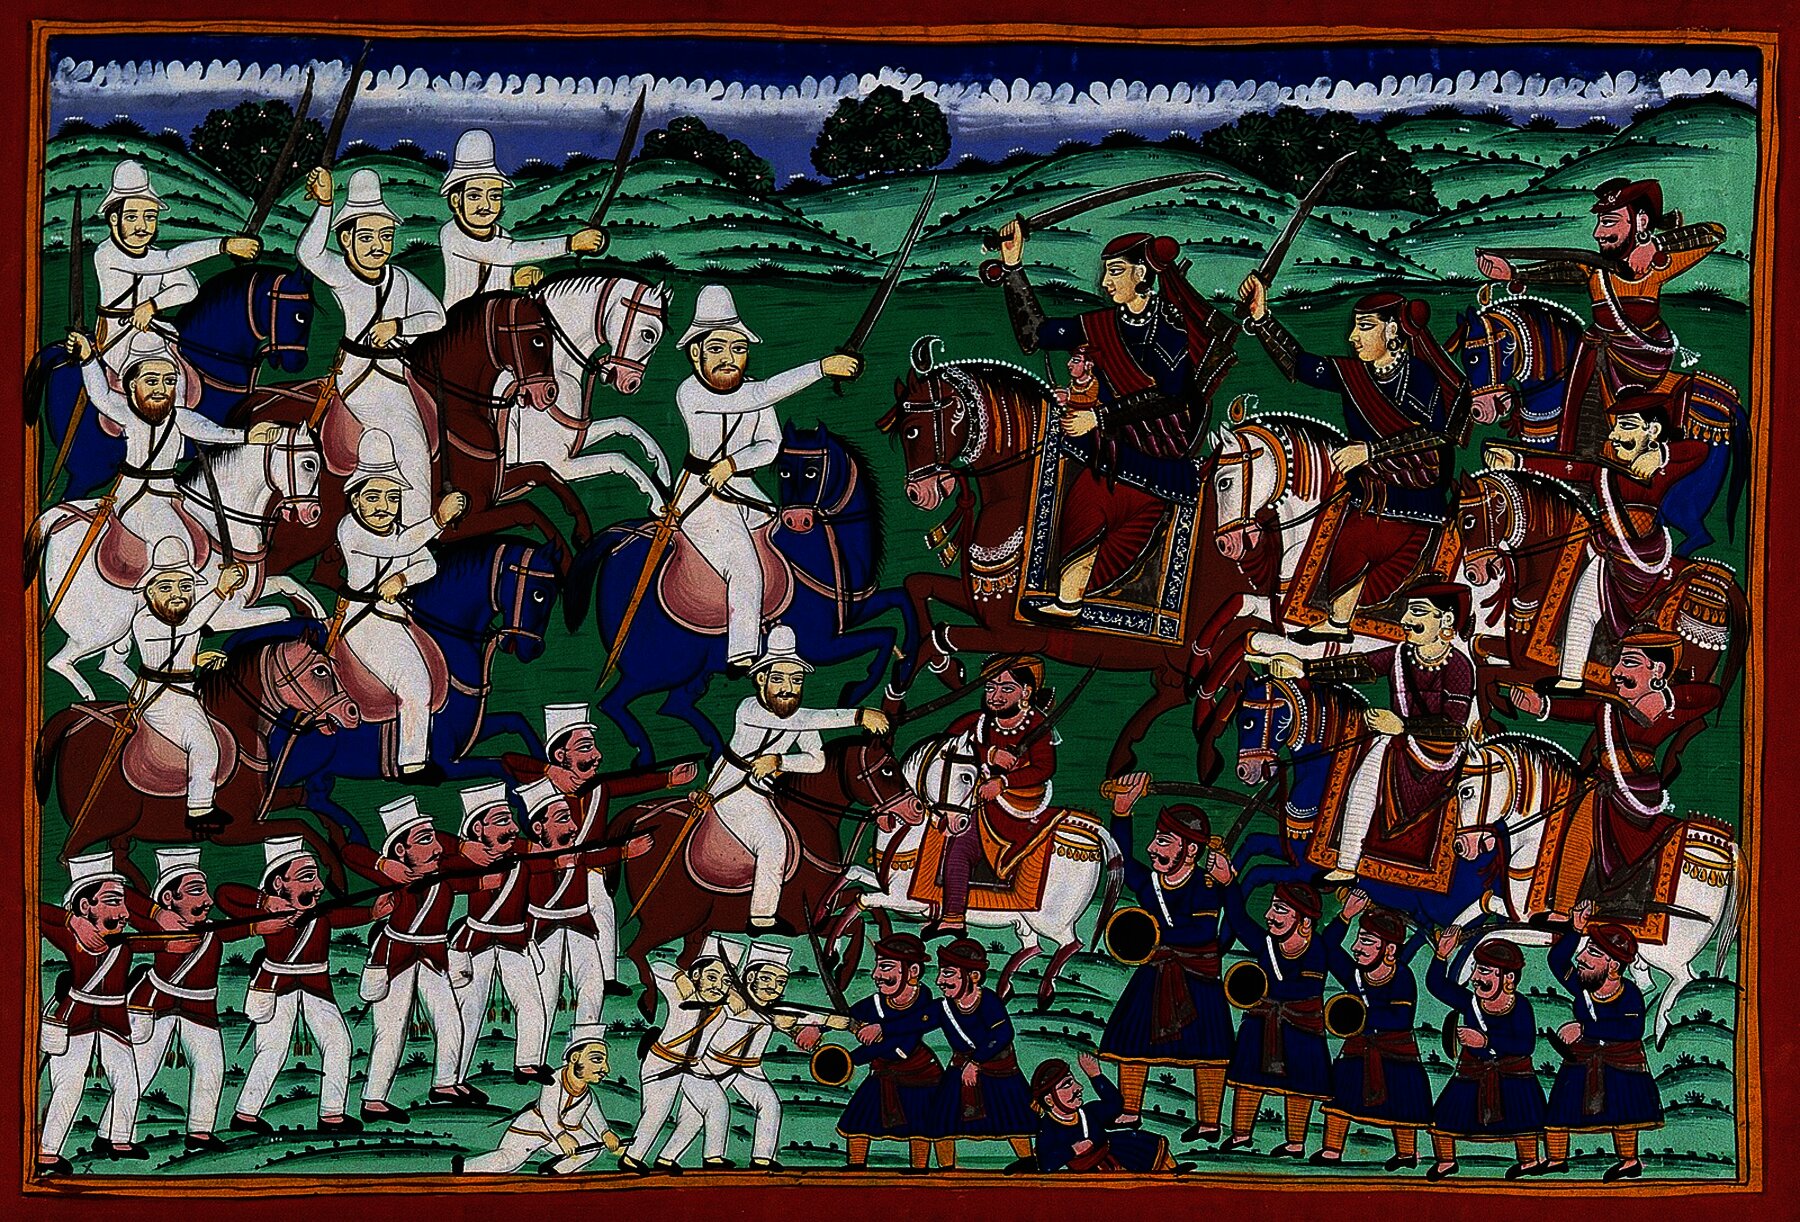 A colorful oil painting of the Rani of Jhansi leadings her troops on horseback.